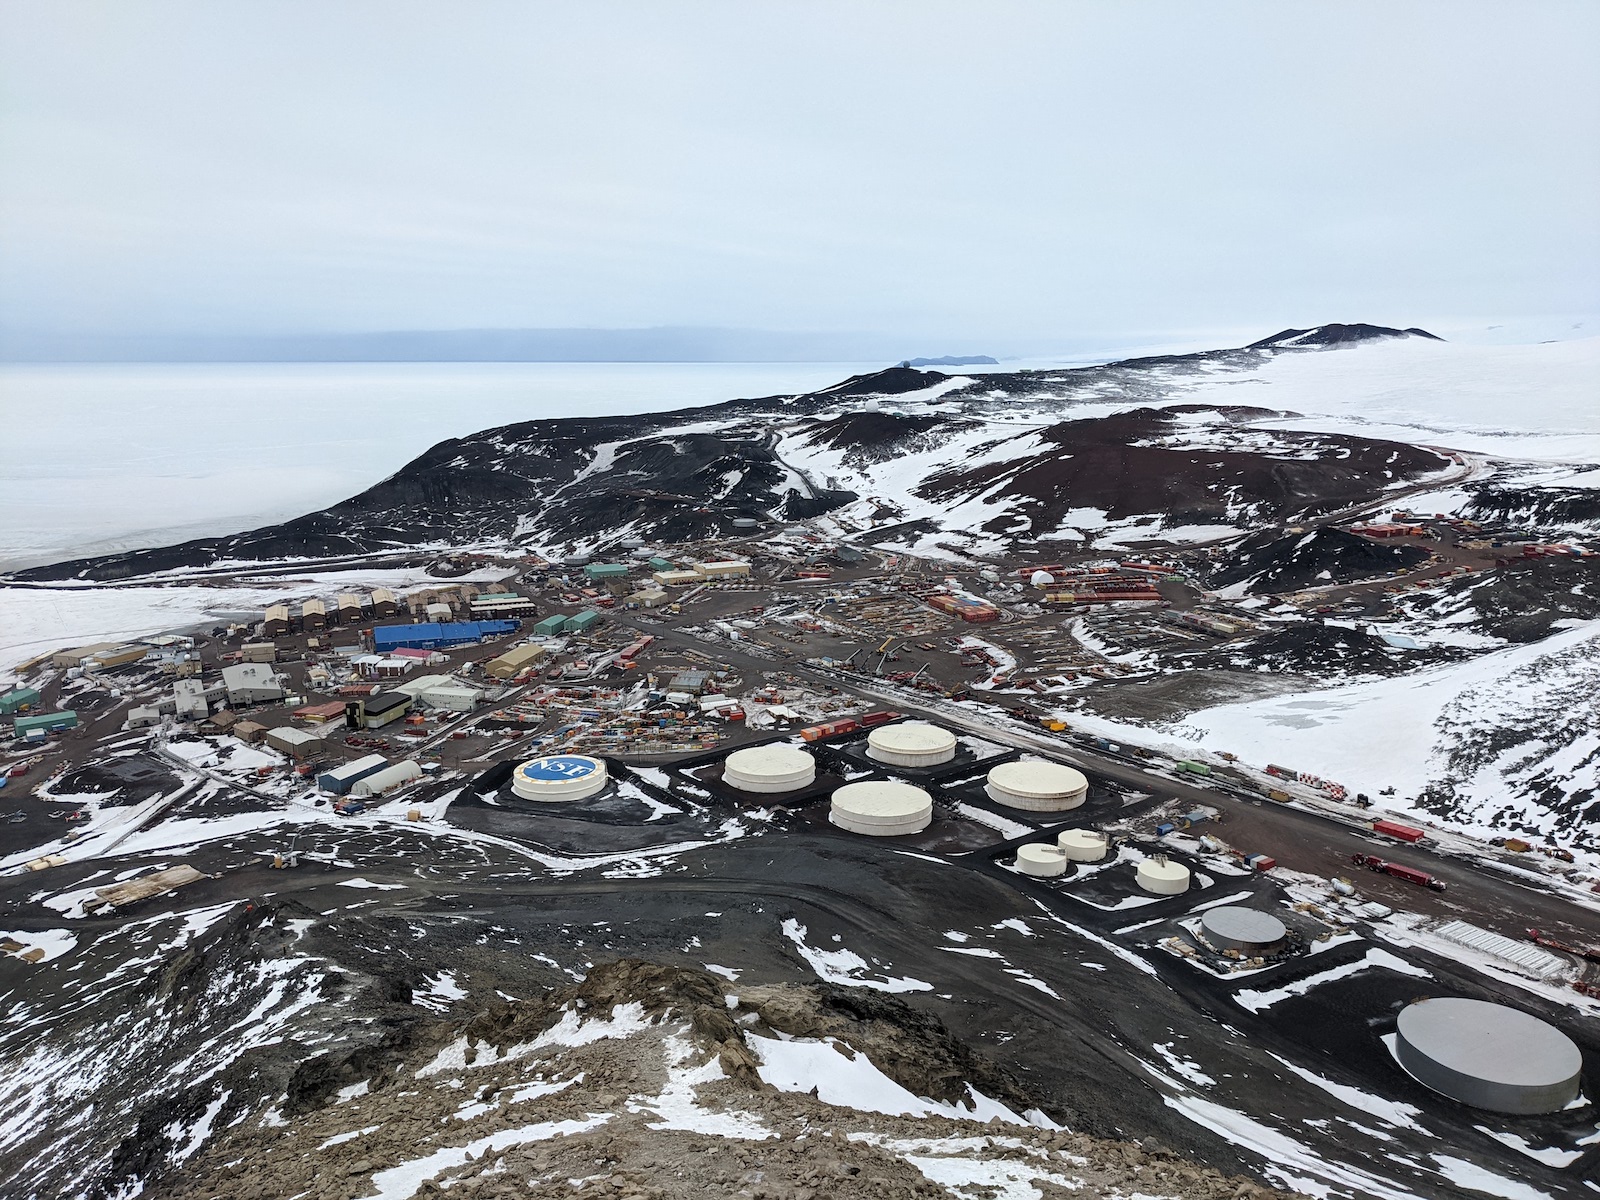 McMurdo Station, as seen from the top of Observation Hill, 750 feet above town. This is the hill I repeated 39 times consecutively to complete the Everest Challenge in 15 hours and 30 minutes.